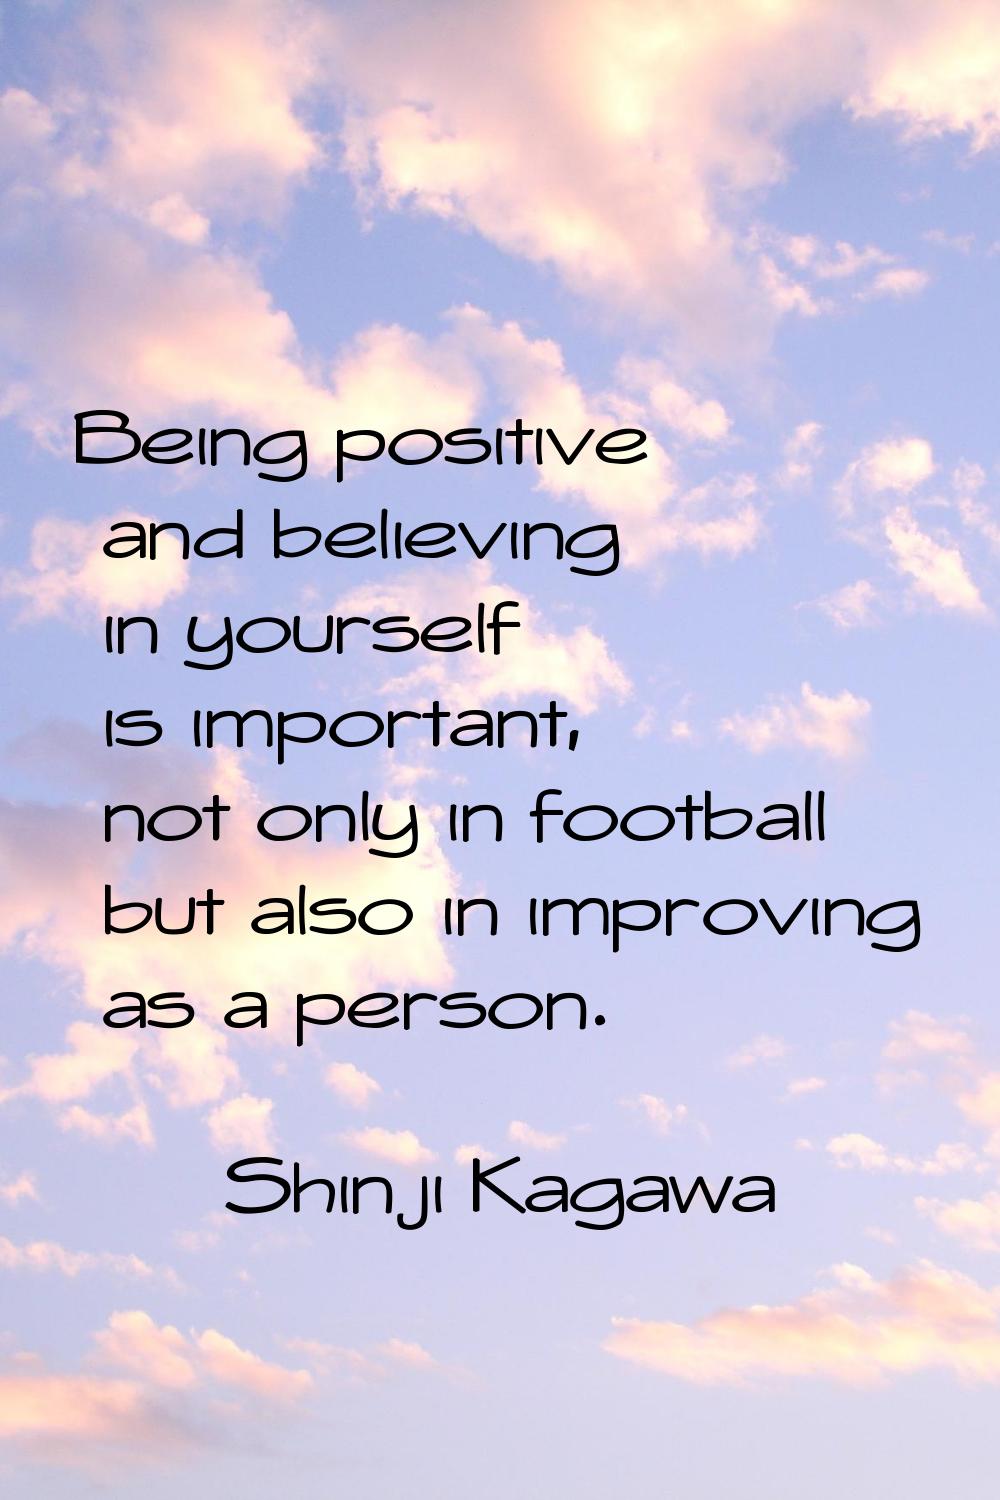 Being positive and believing in yourself is important, not only in football but also in improving a